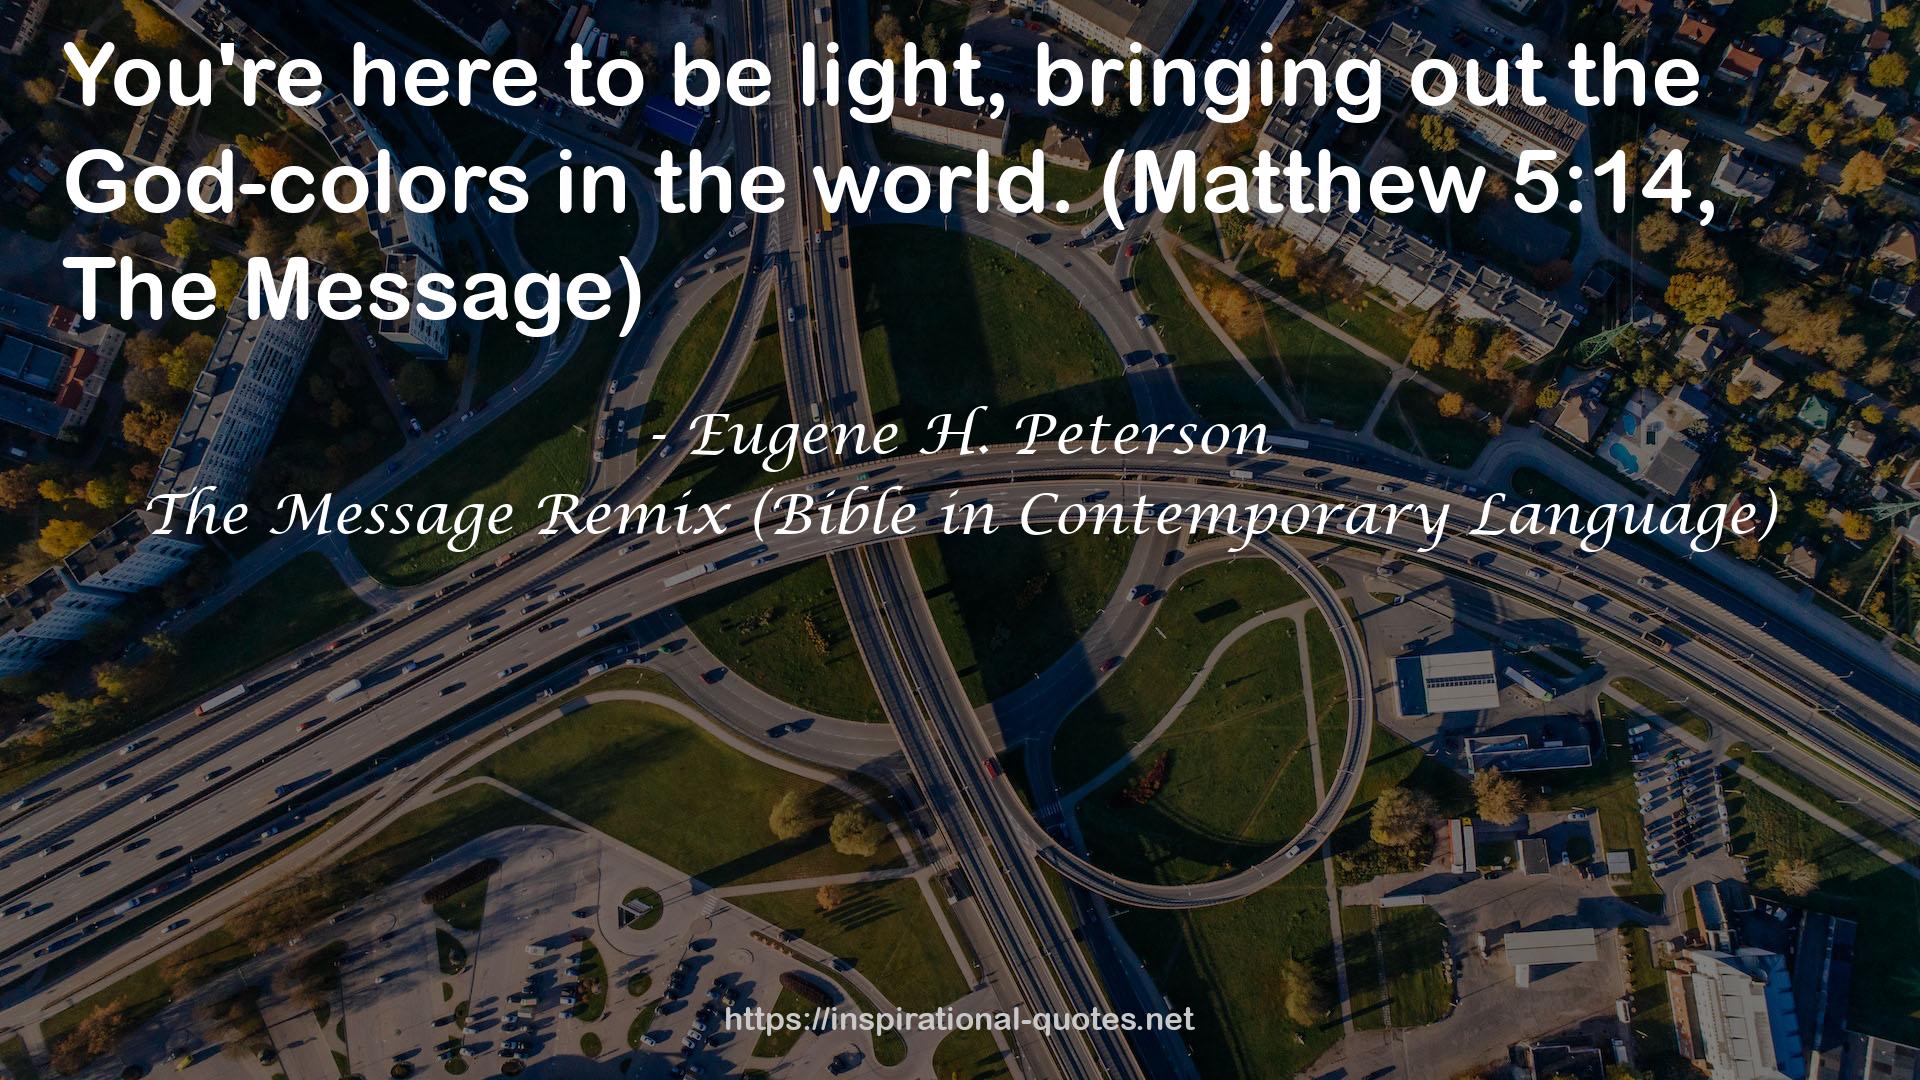 Eugene H. Peterson QUOTES